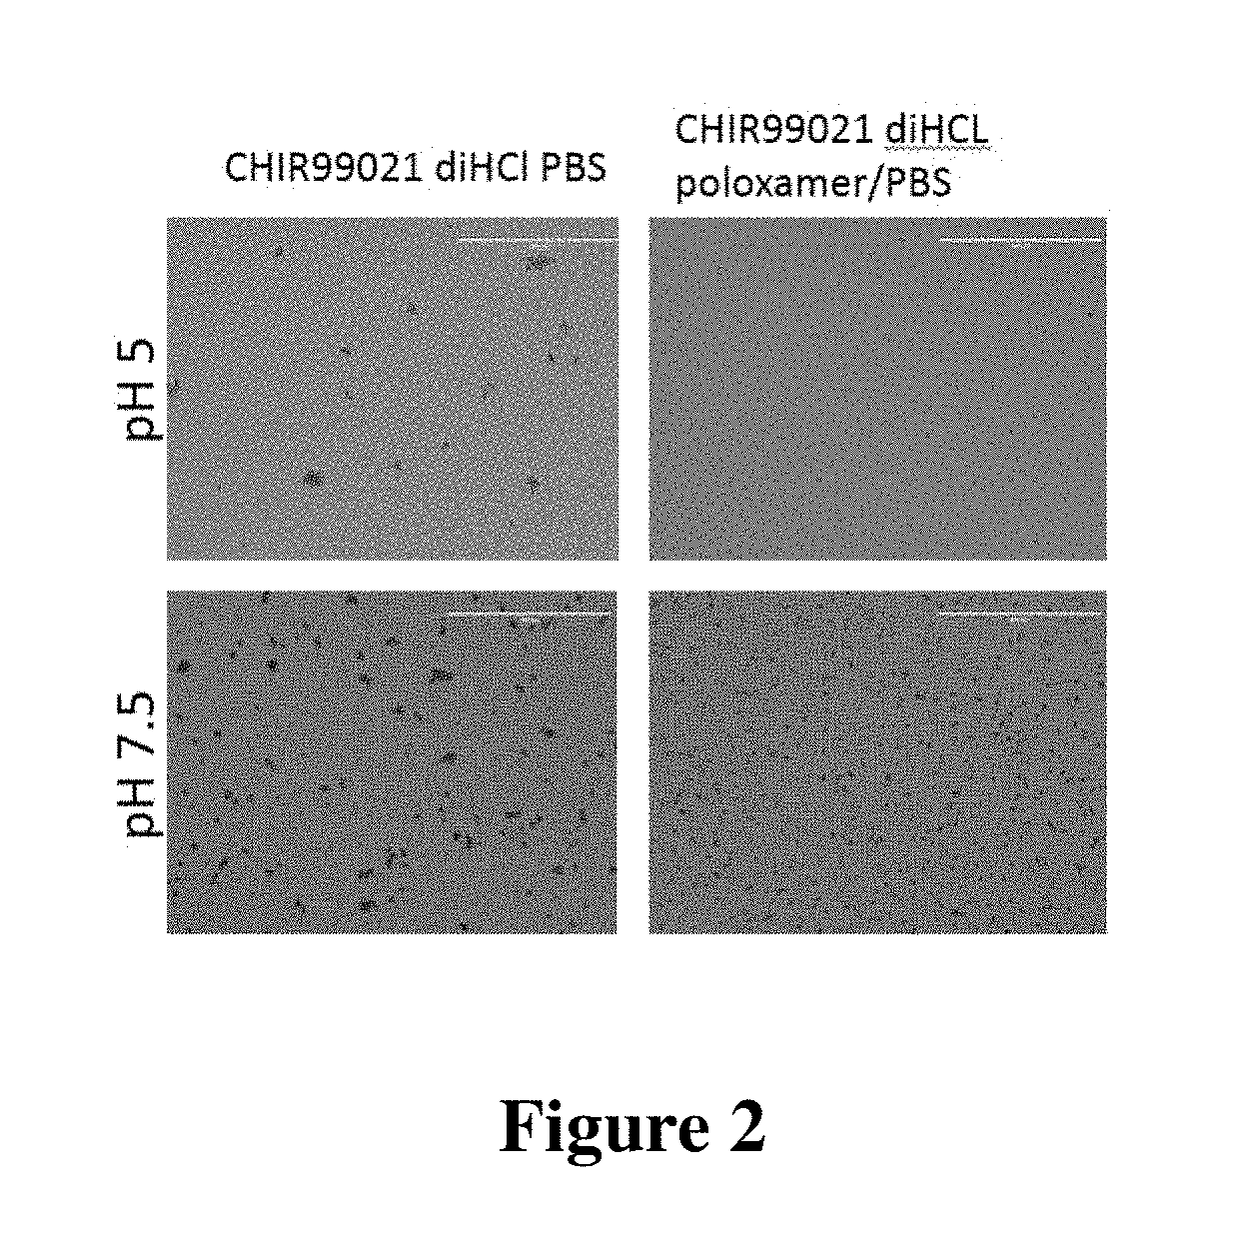 Solubilized compositions for controlled proliferation of stem cells / generating inner ear hair cells using GSK3 inhibitors: I